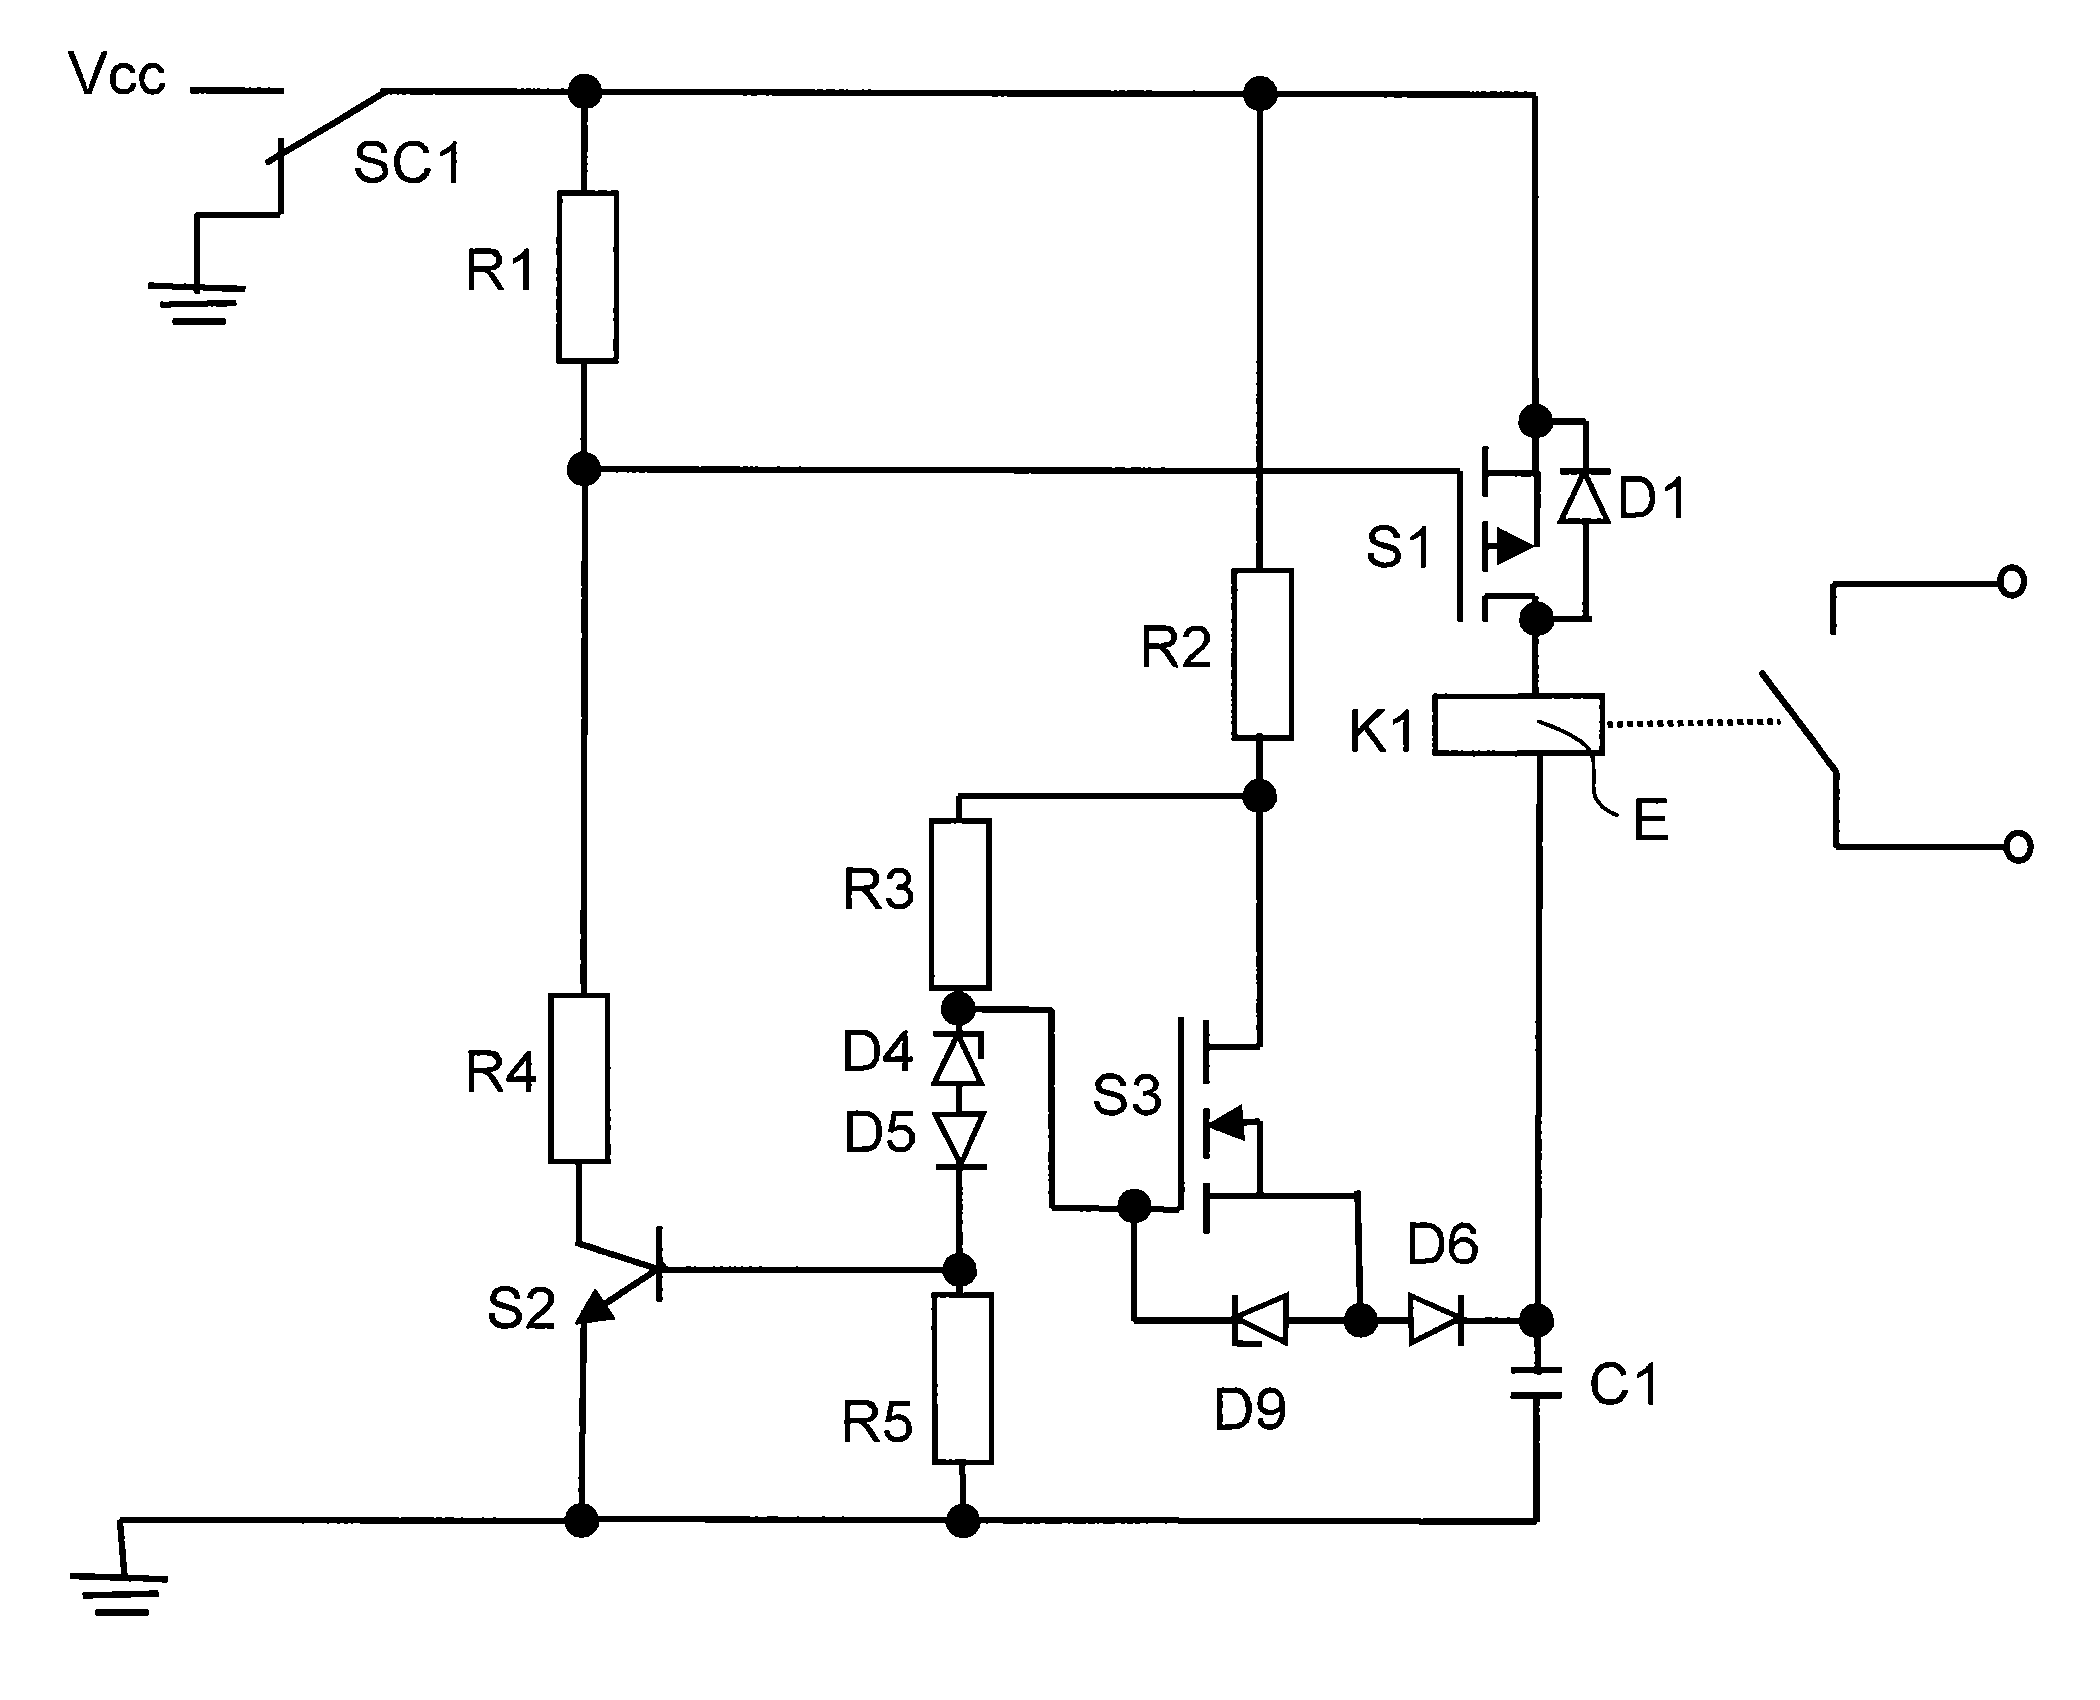 Circuit arrangement with a relay incorporating one field coil as well as switch contacts